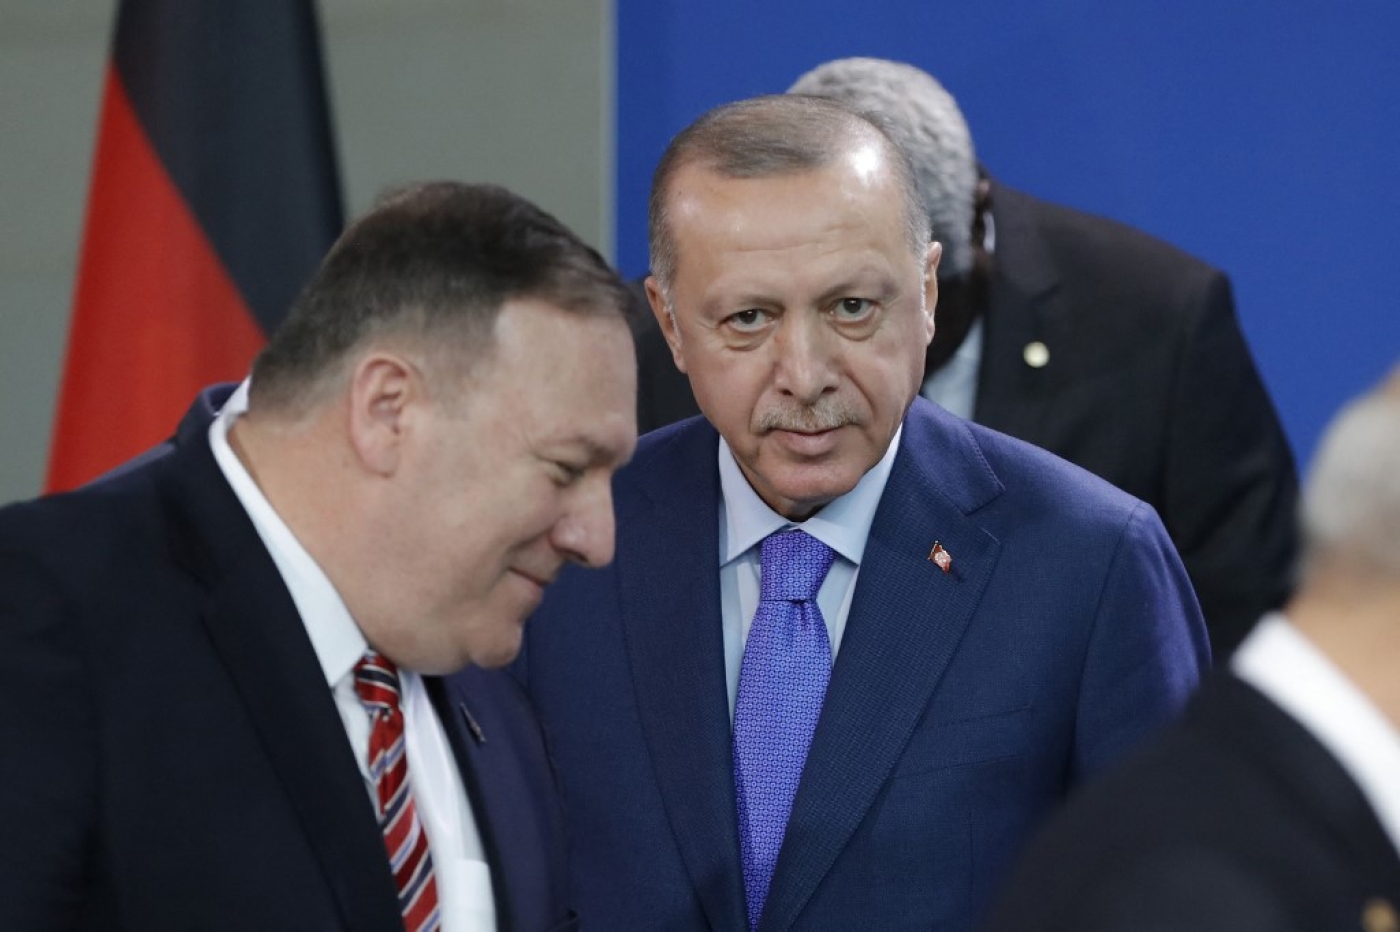 Turkish President Recep Tayyip Erdogan (C) looks on as then-US Secretary of State Mike Pompeo (L) walks past prior a family picture during a Peace summit on Libya at the Chancellery in Berlin, on January 19, 2020.  (AFP)